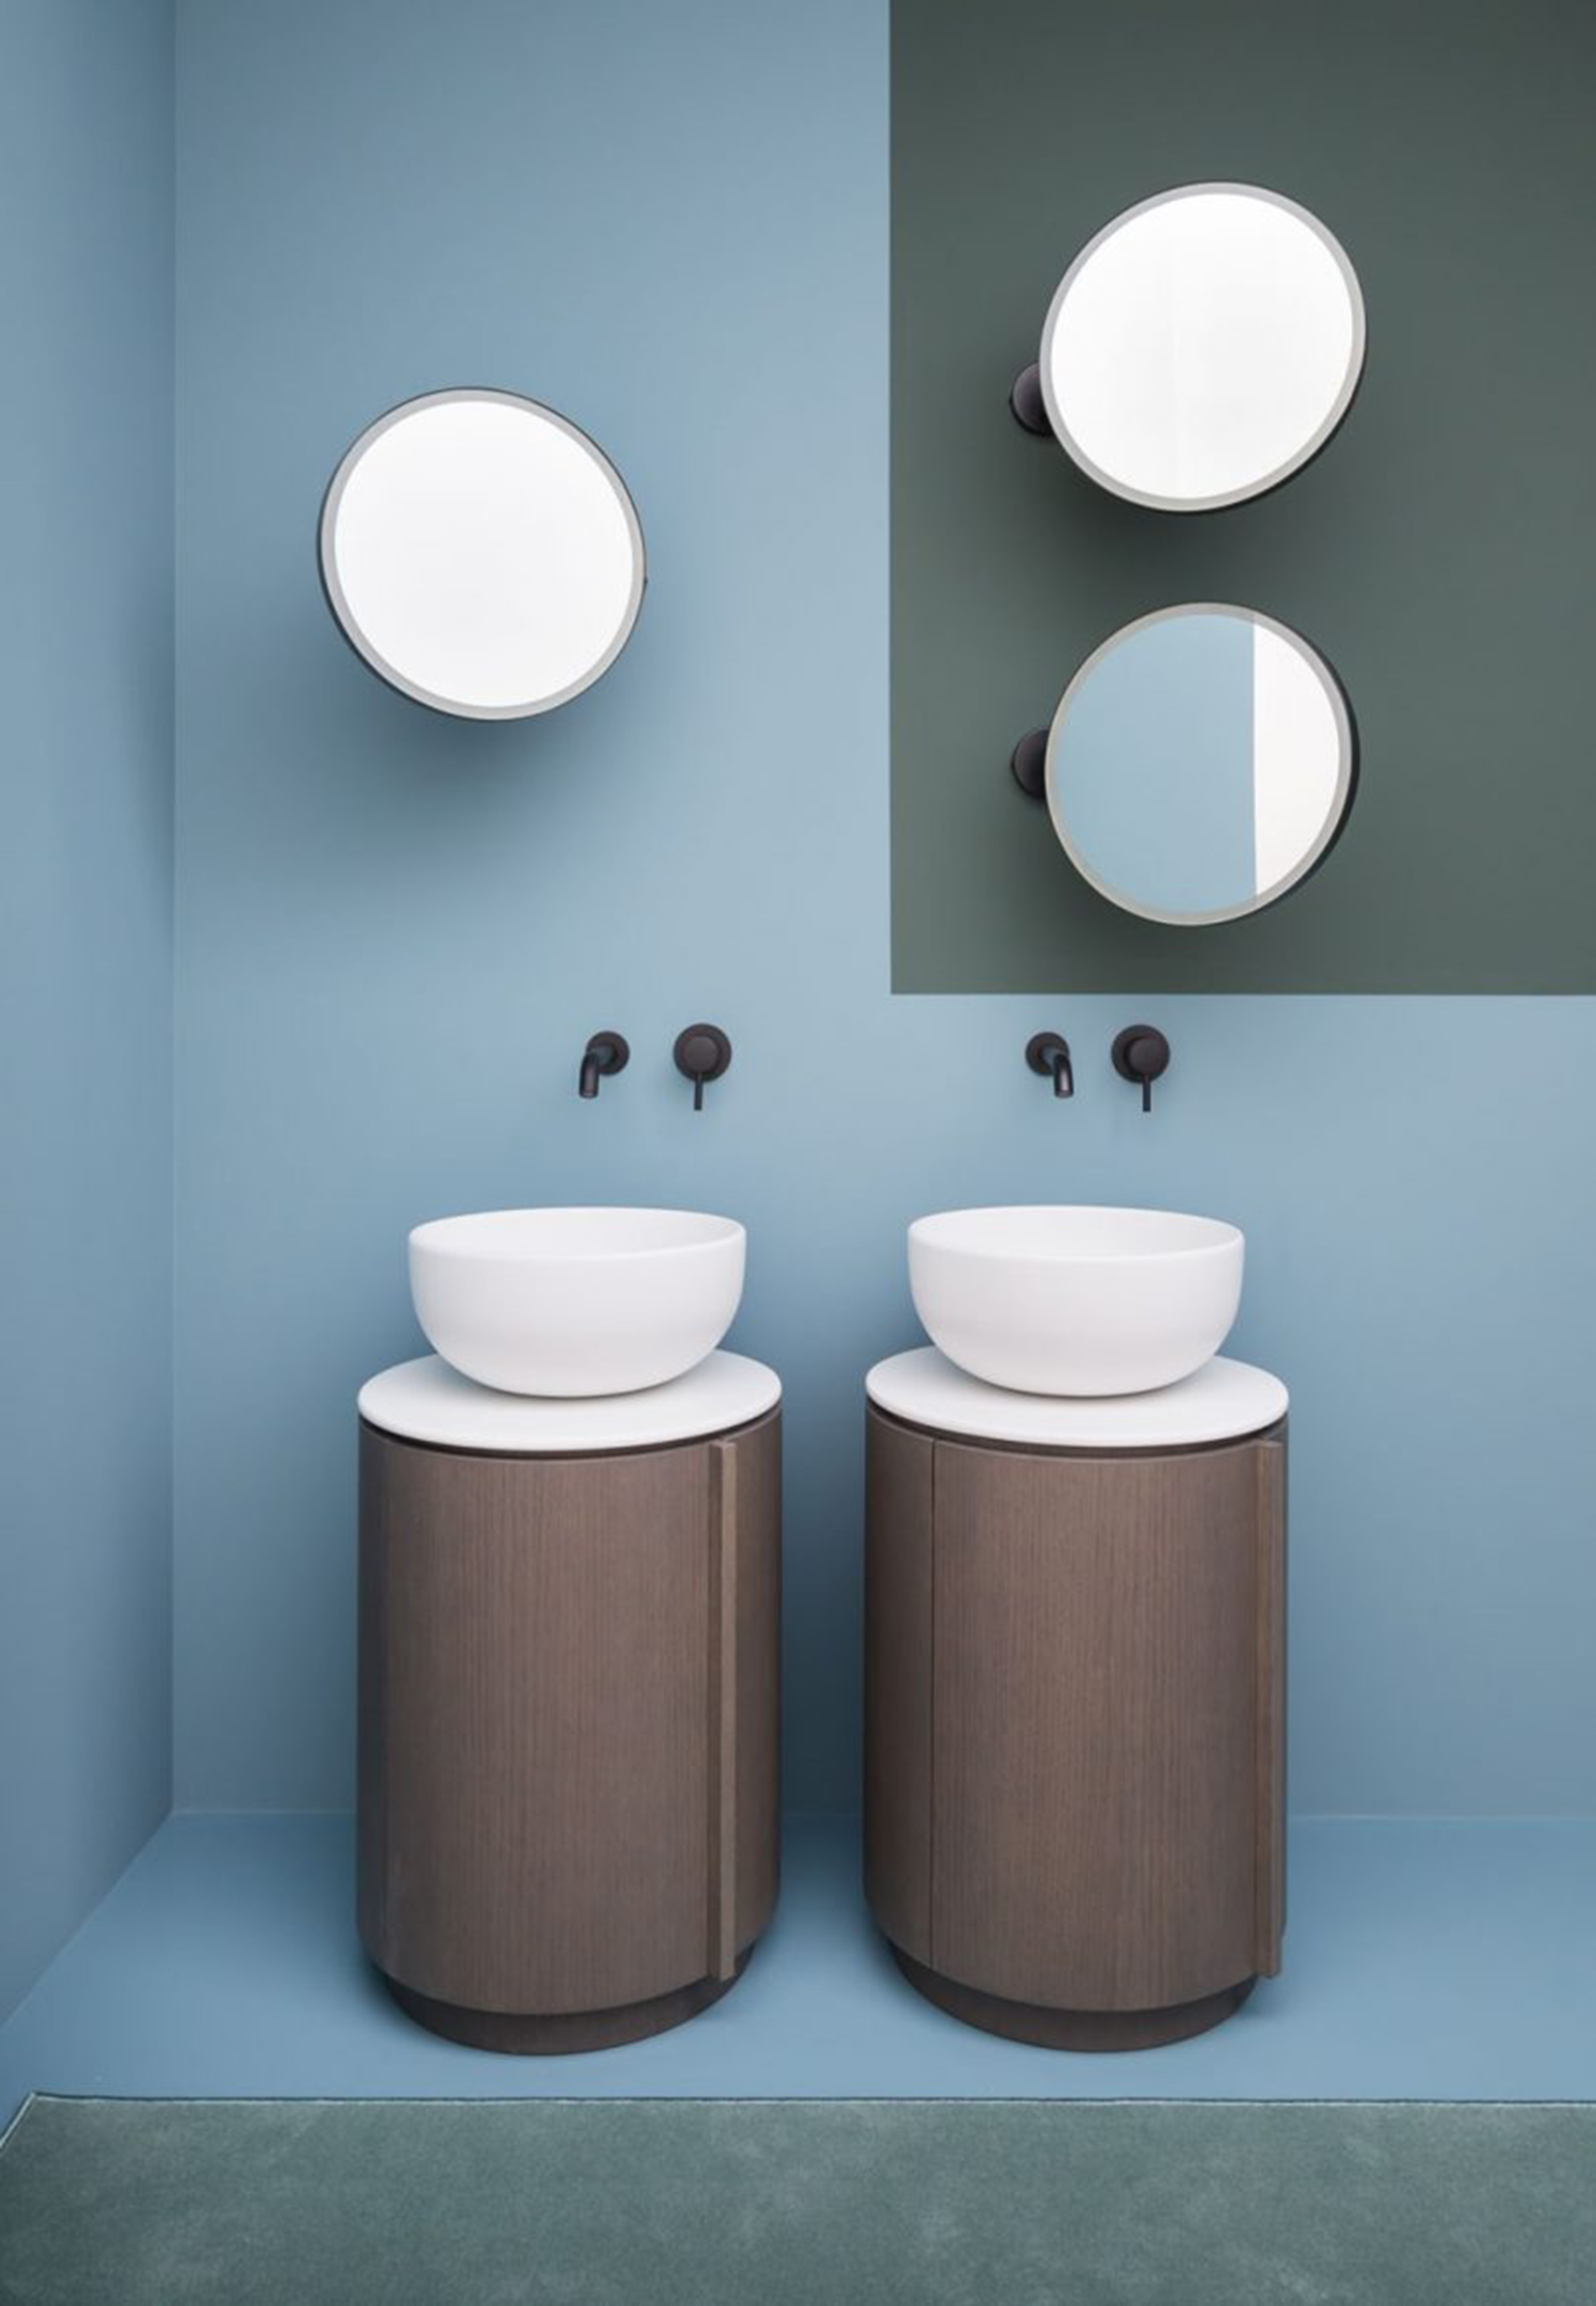 3 Freestandings That Bring a Minimalistic touch to Your Bathroom